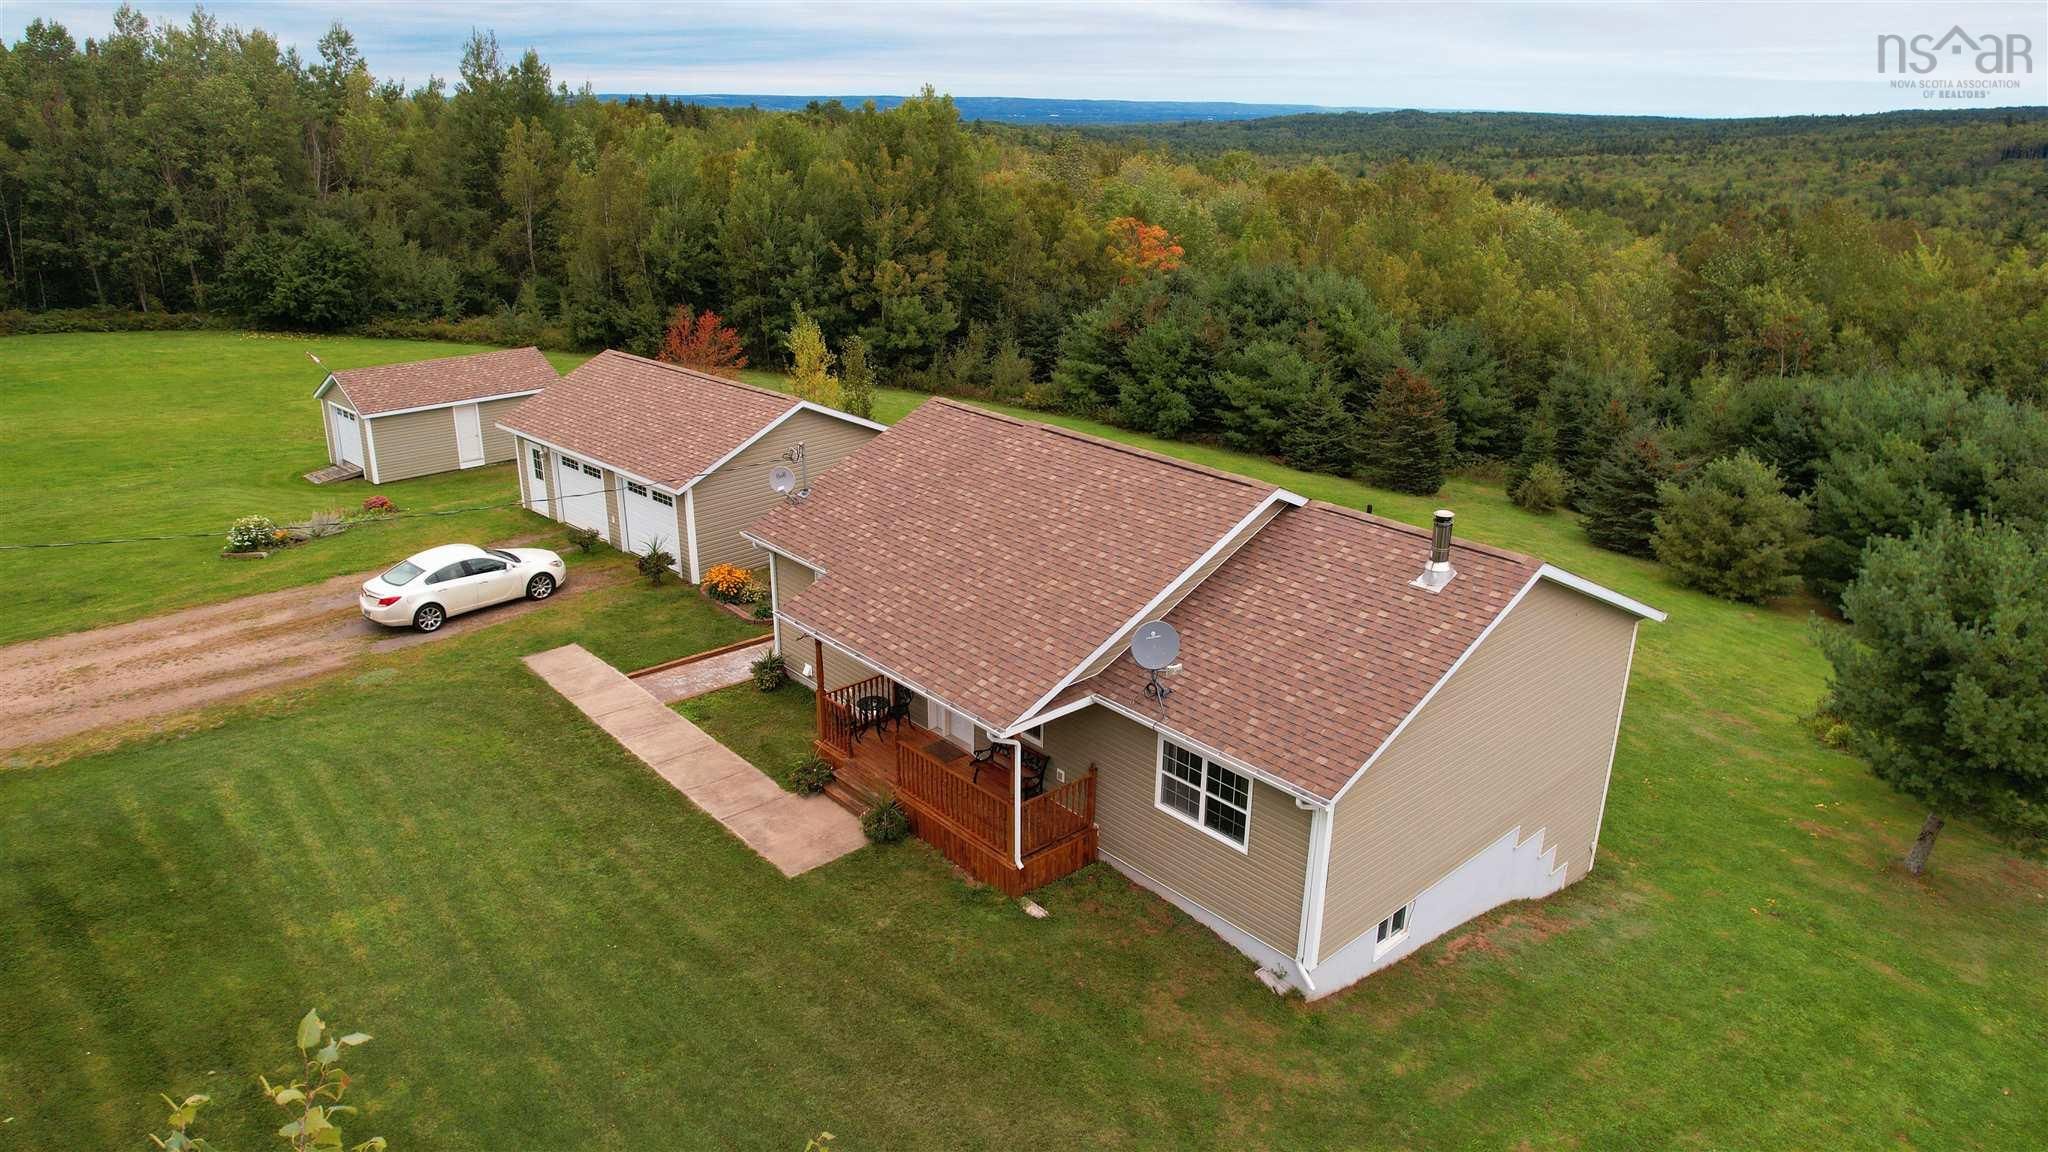 Main Photo: 571 East Torbrook Road in South Tremont: 404-Kings County Residential for sale (Annapolis Valley)  : MLS®# 202123955